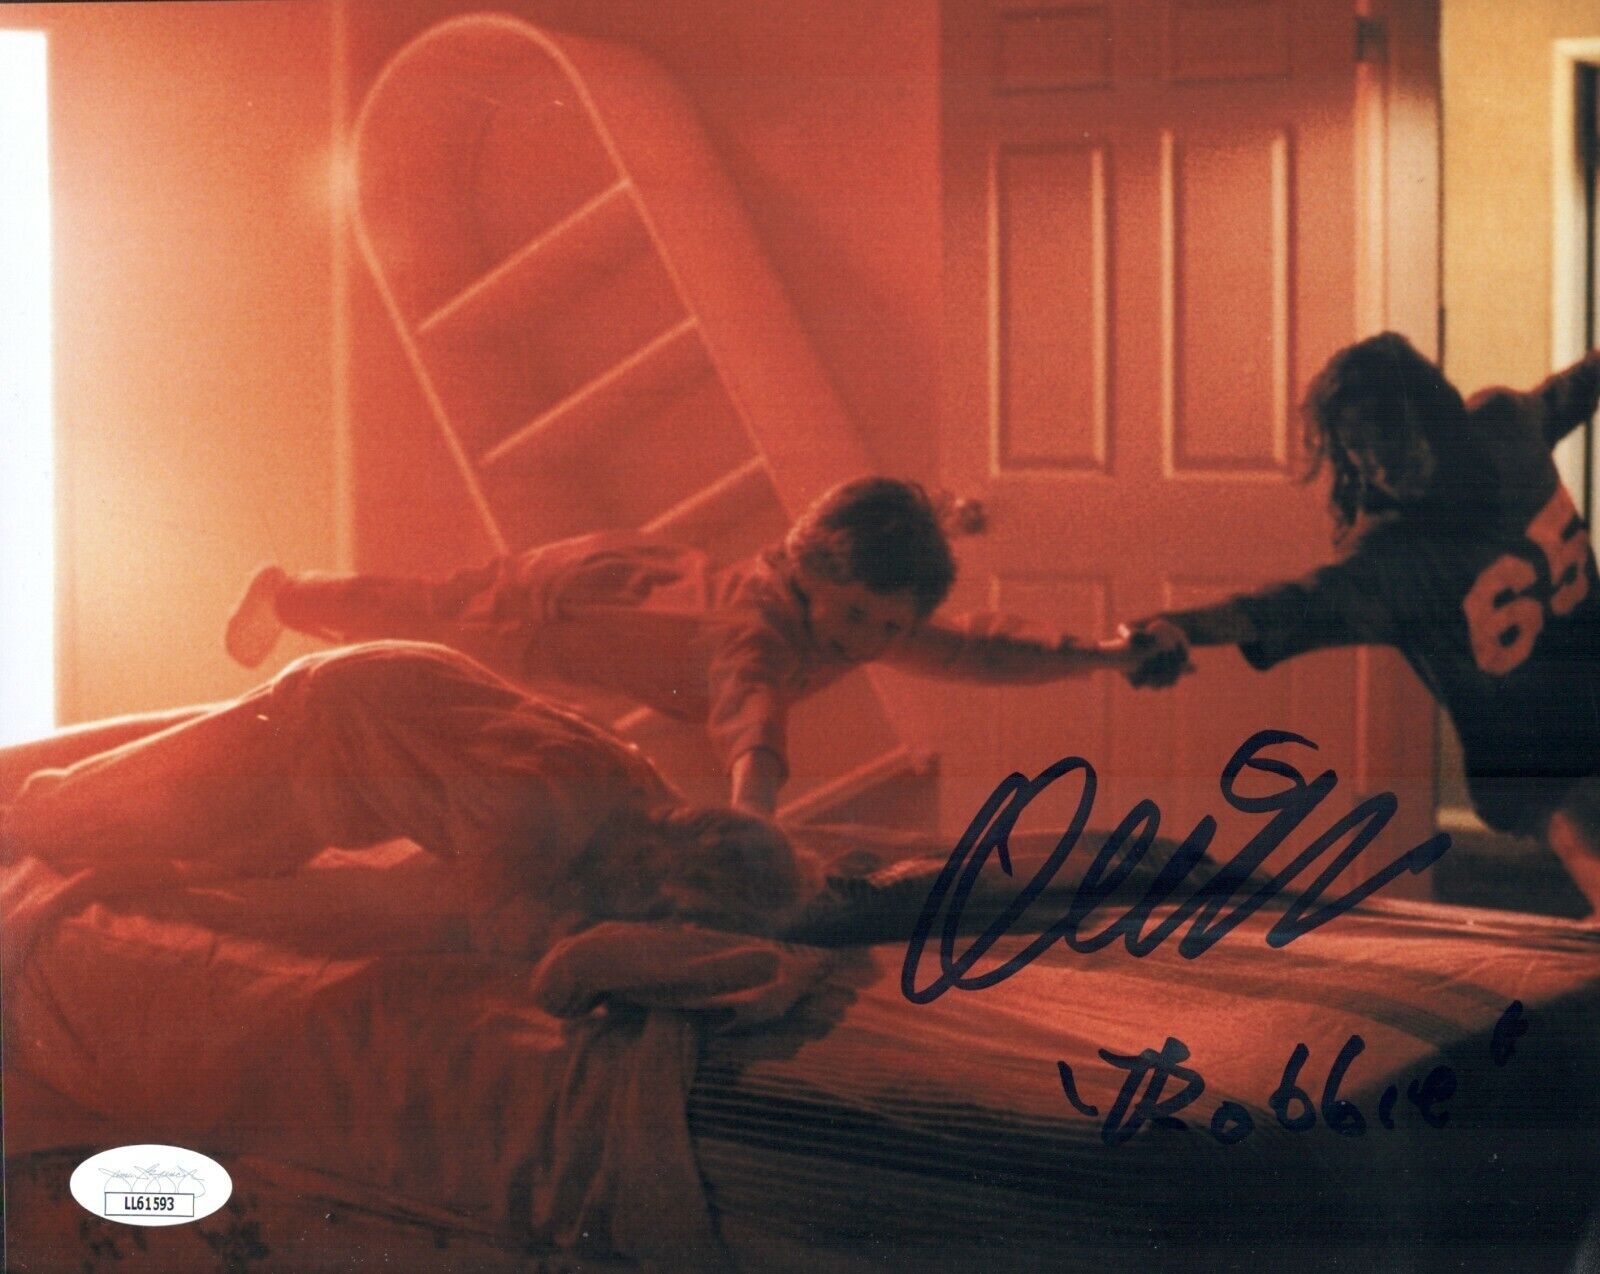 OLIVER ROBINS Signed ROBBIE 8x10 Photo Poster painting POLTERGEIST Horror Autograph JSA COA Cert